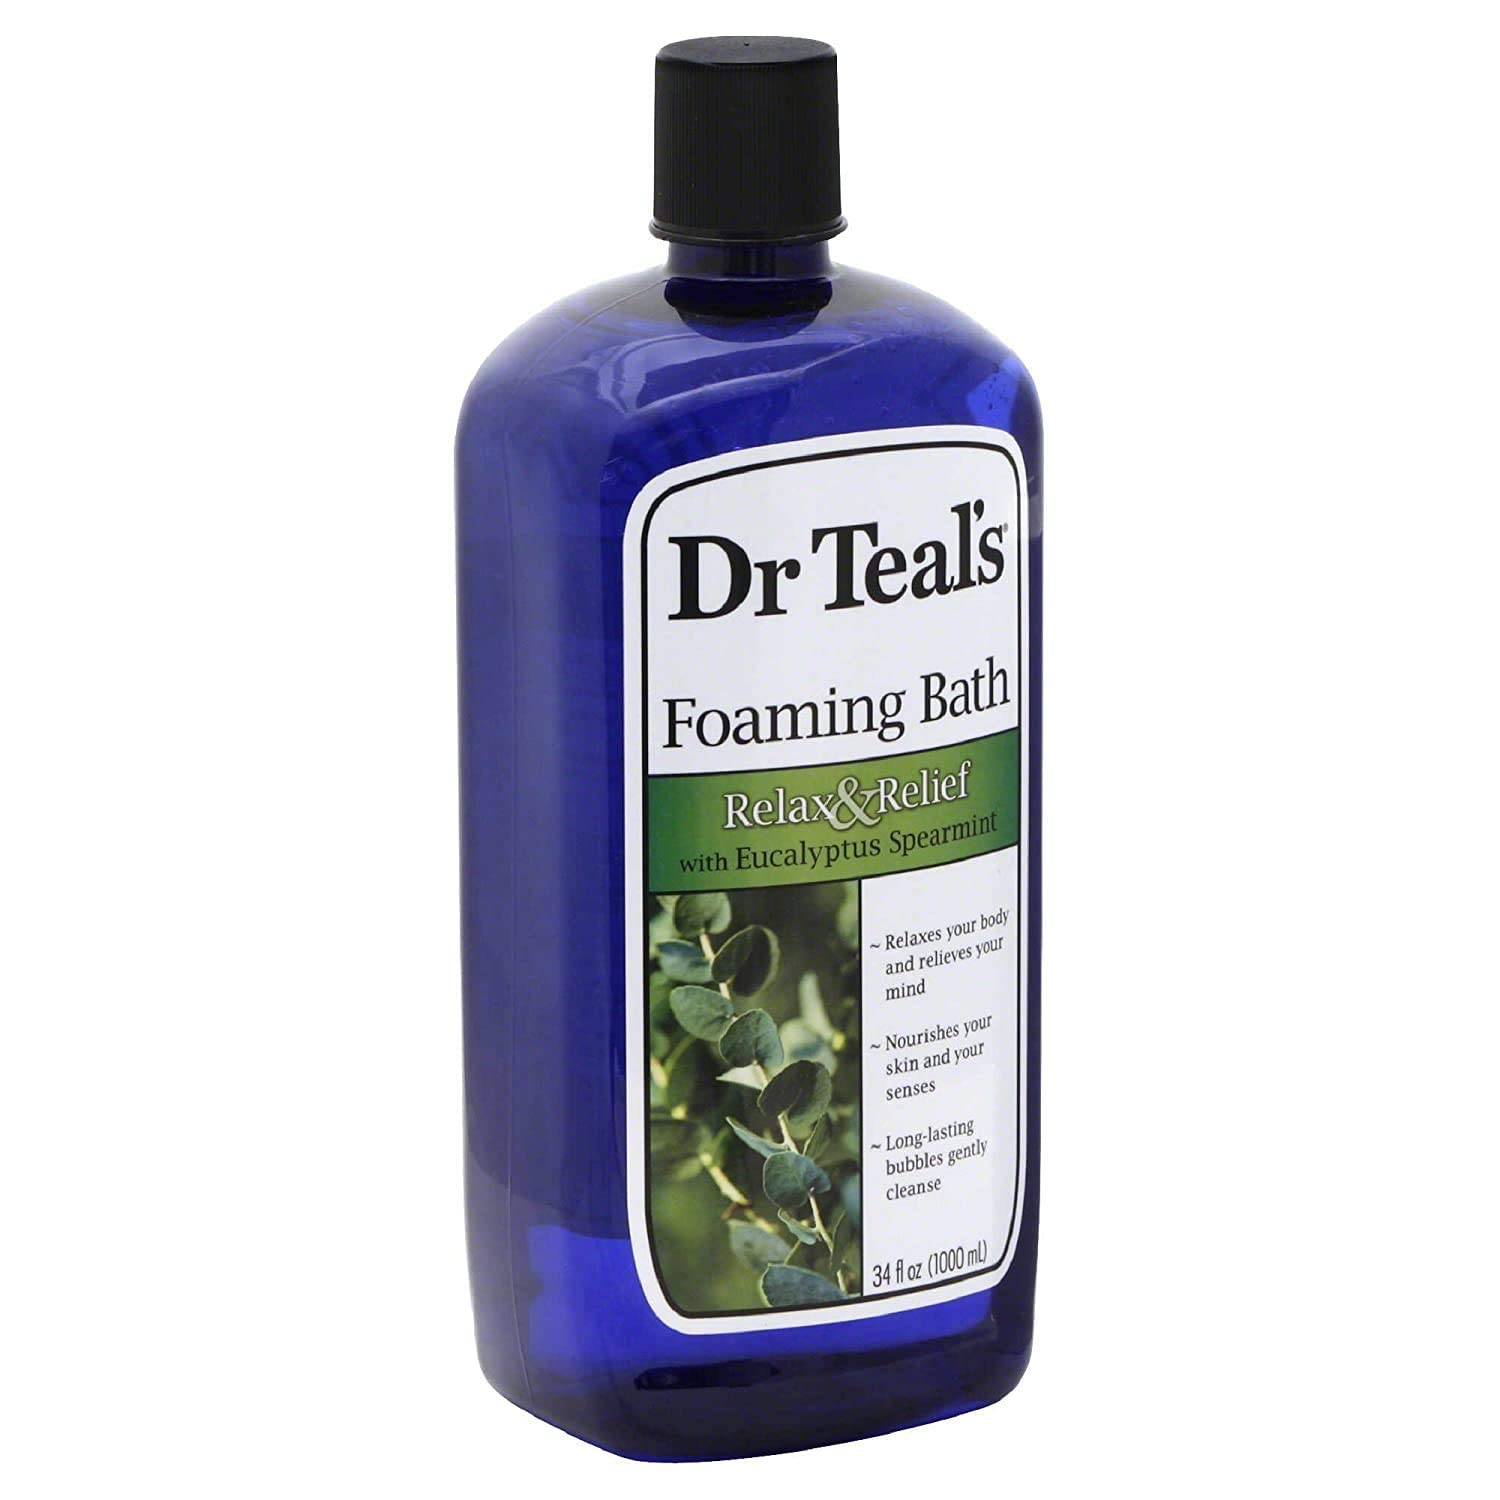 Dr Teal's Foaming Bath Variety Gift Set (2 Pack, 34oz ea.) - Soothe & Sleep Lavender & Relax & Relief Eucalyptus & Spearmint - Pure Epsom Salt & Essential Oils Alleviate Stress & Clear The Mind